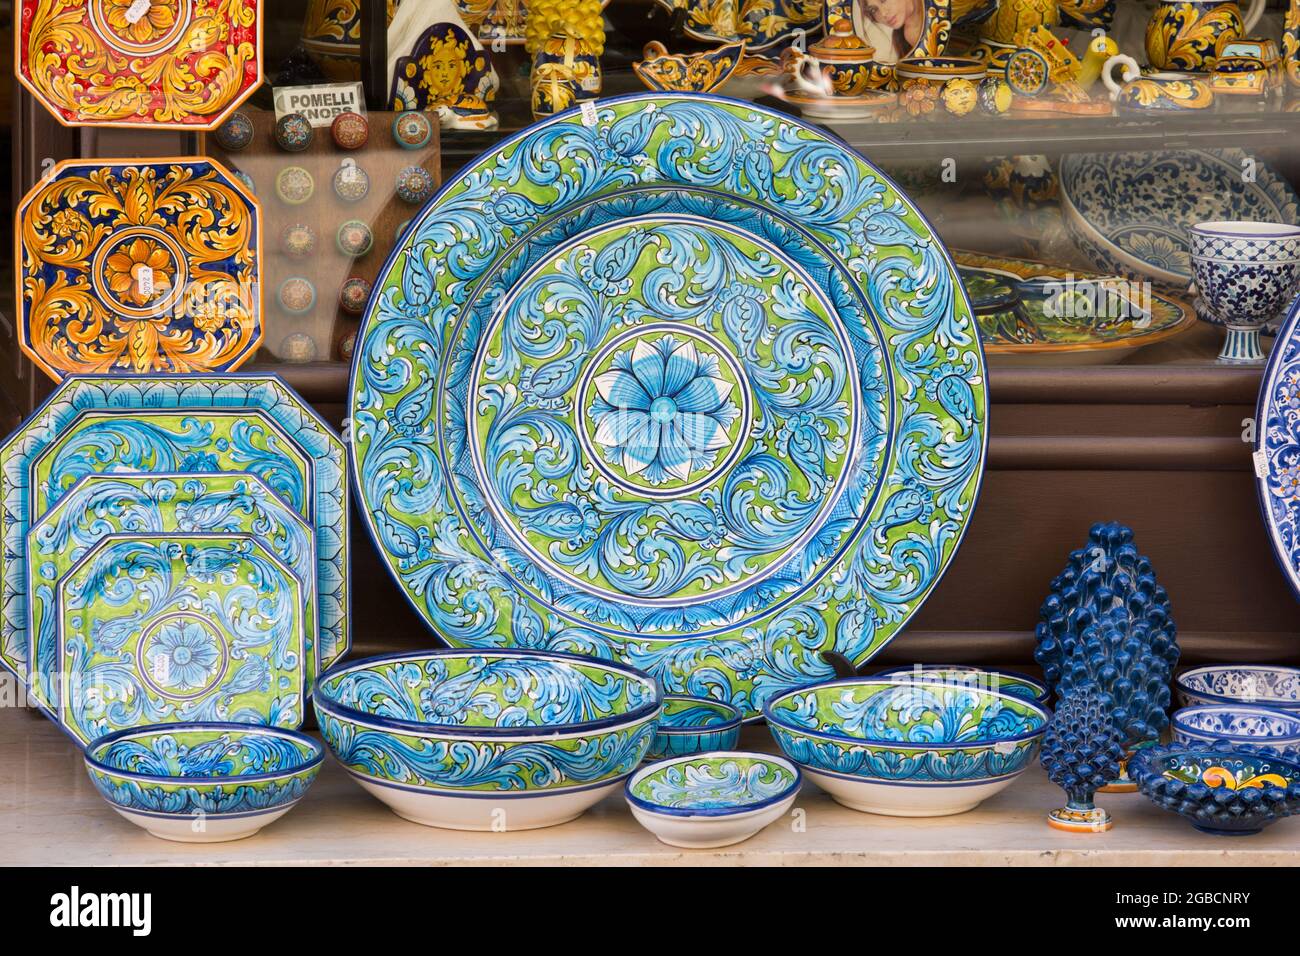 Taormina, Messina, Sicily, Italy. Eye-catching ceramic ware on display outside a typical souvenir and craft shop in Via Teatro Greco. Stock Photo